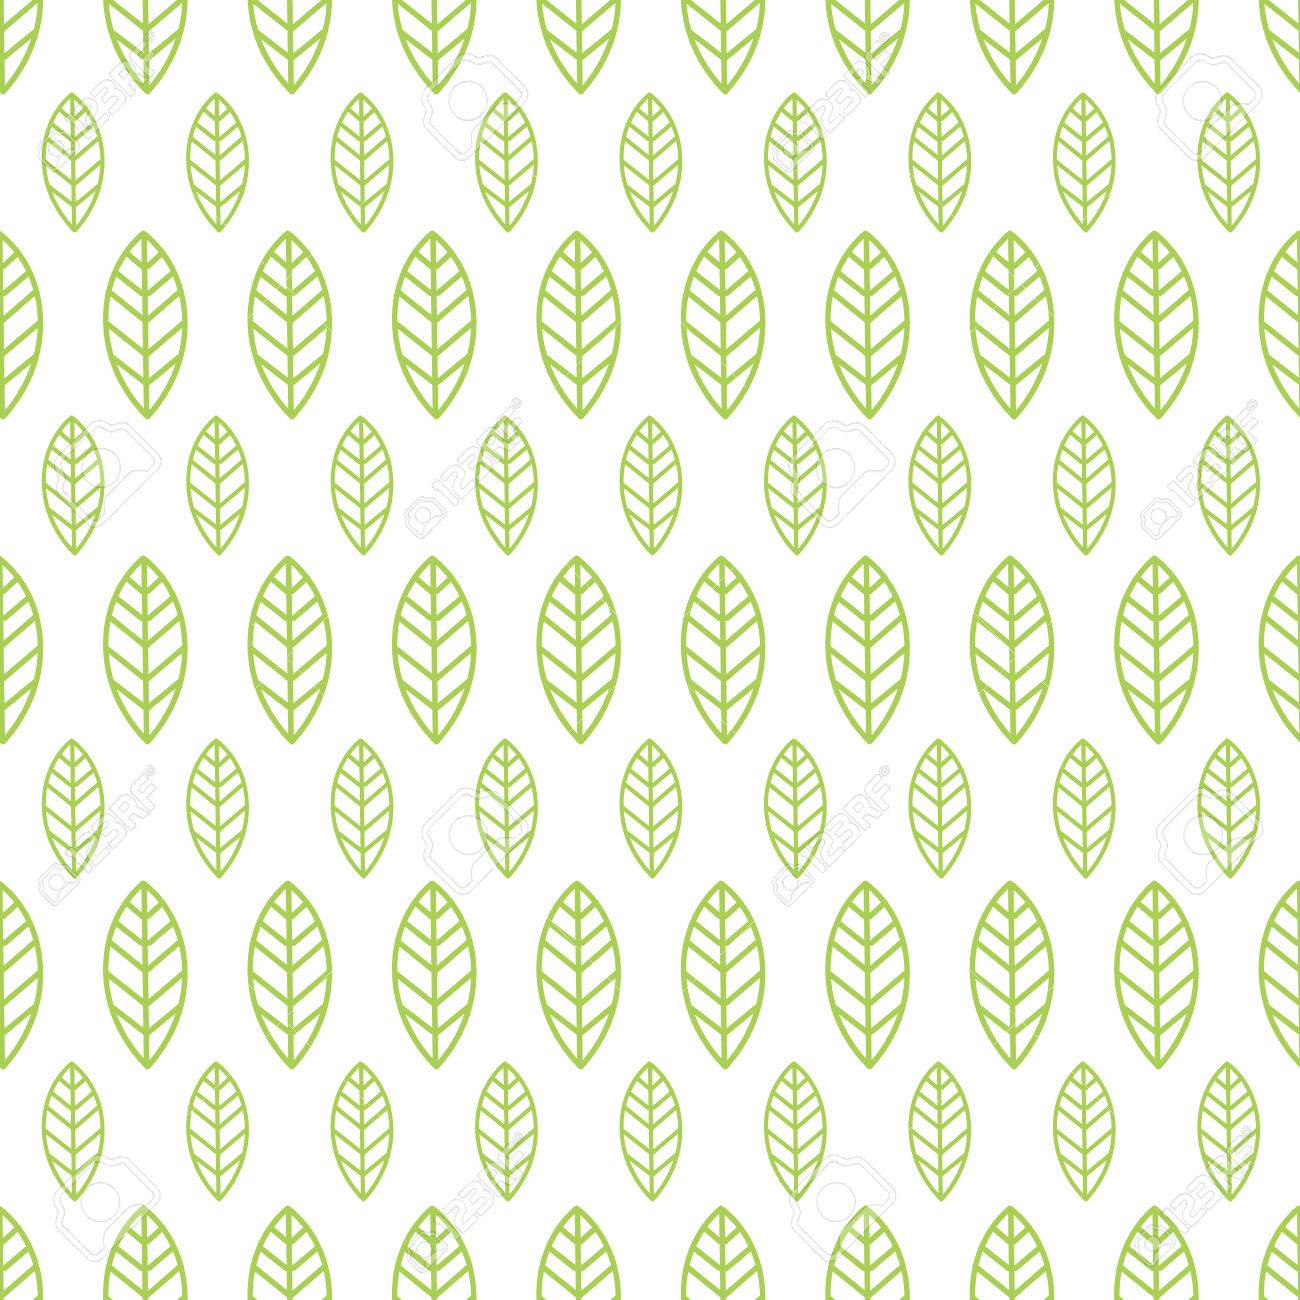 Simple Seamless Organic Wallpaper With A Pattern Of Green Leaves